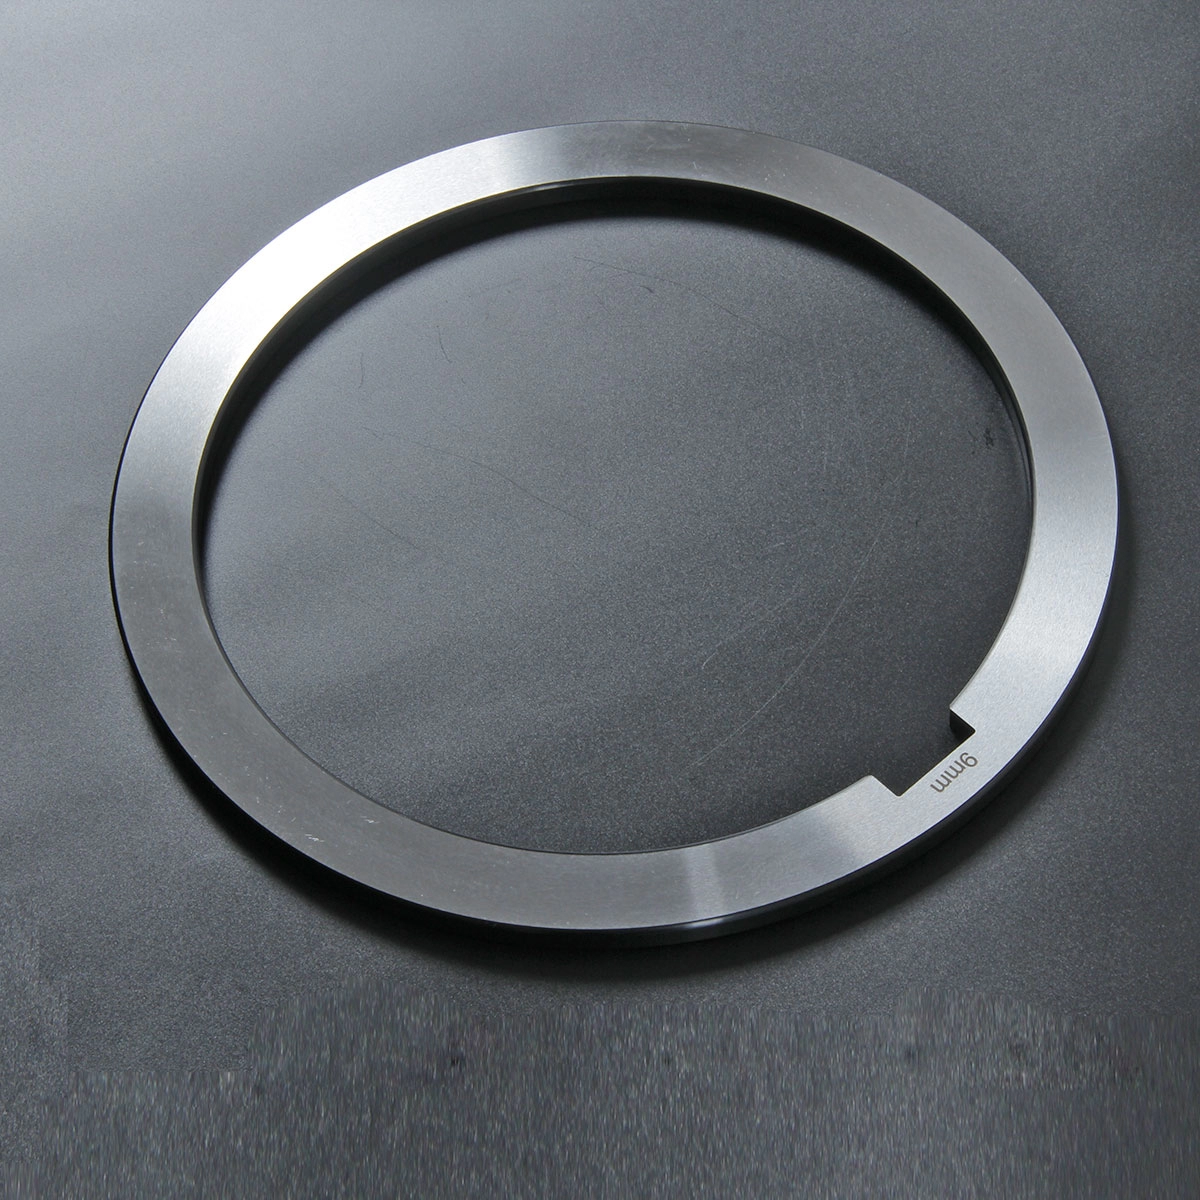 High precision slitter steel metal spacer with rubber disc for slitting line knives